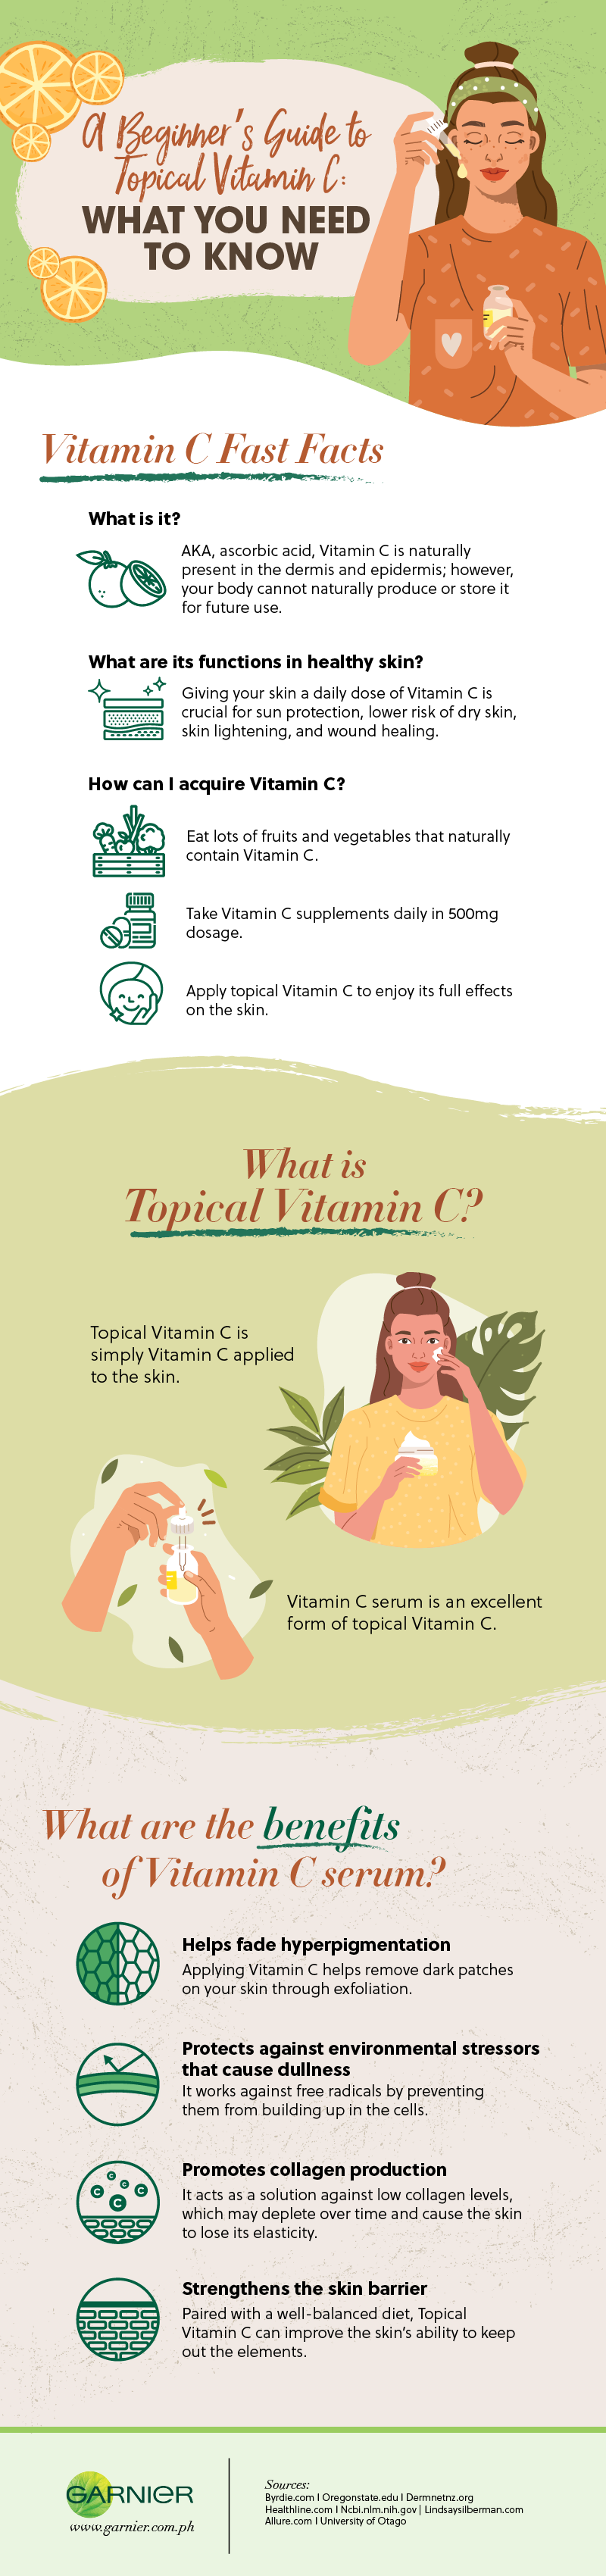 A Beginner’s Guide to Topical Vitamin C